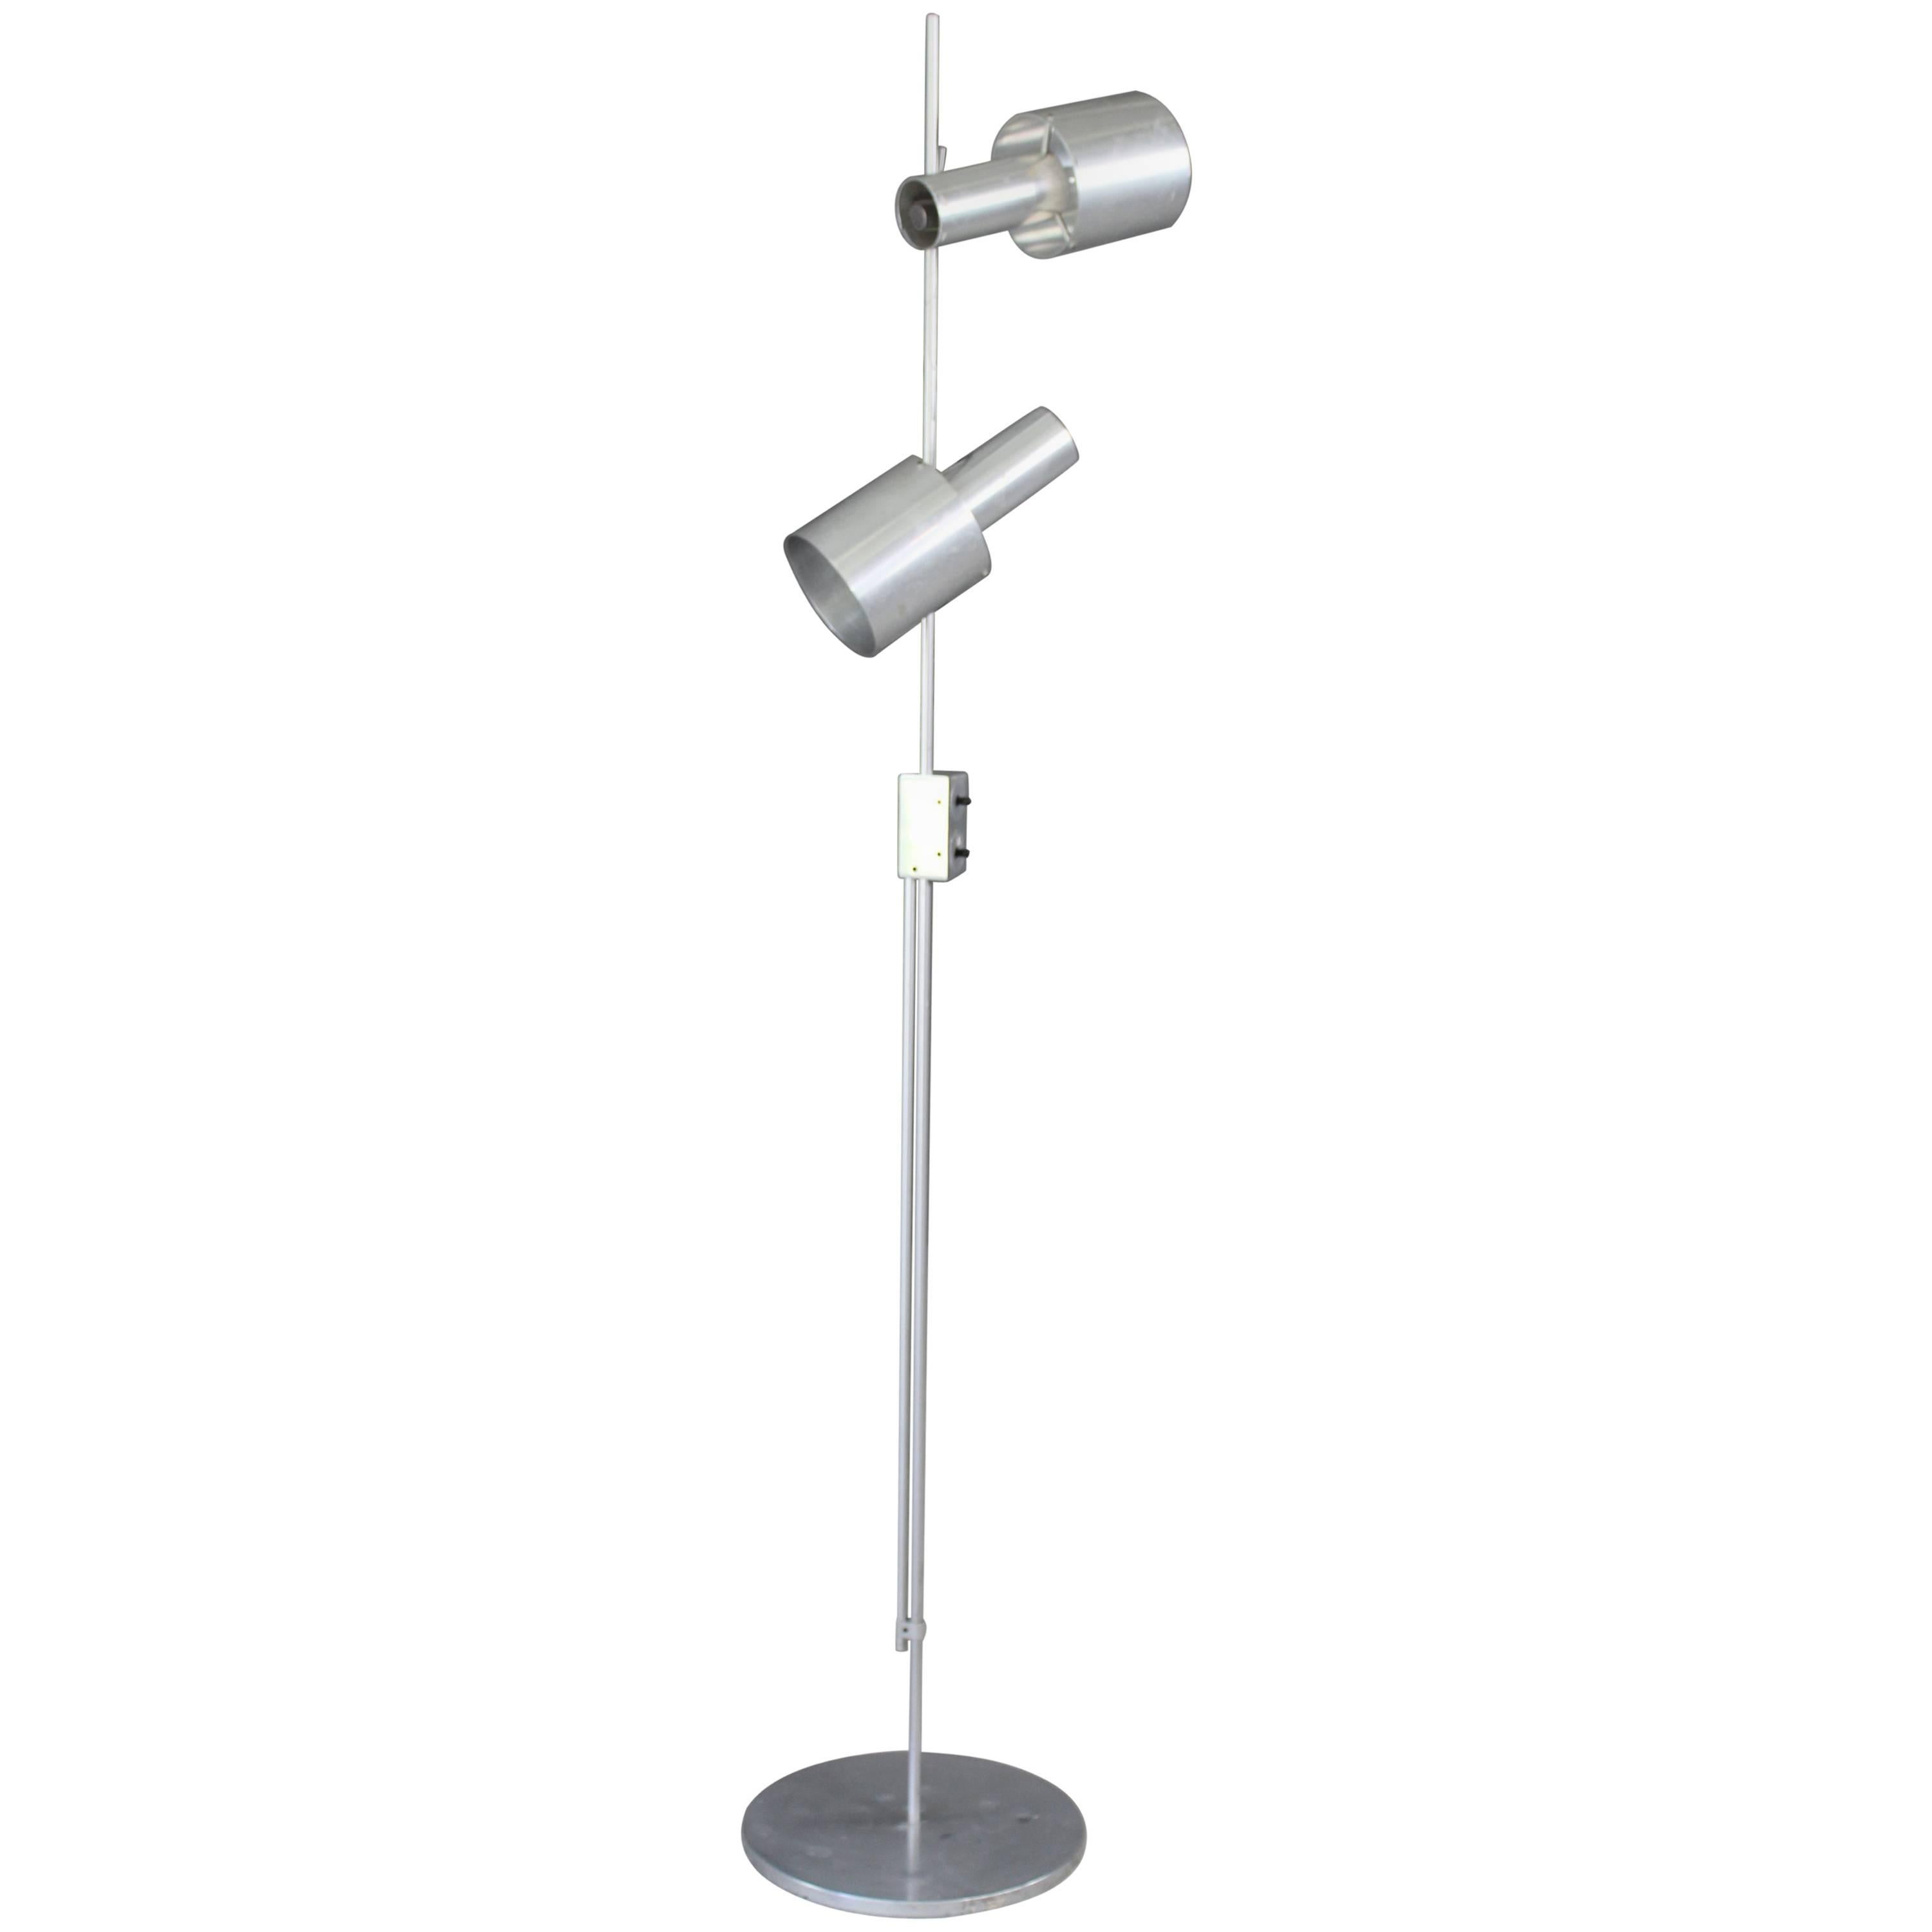 Aluminium Floor Lamp by Peter Nelson for Architectural Lighting